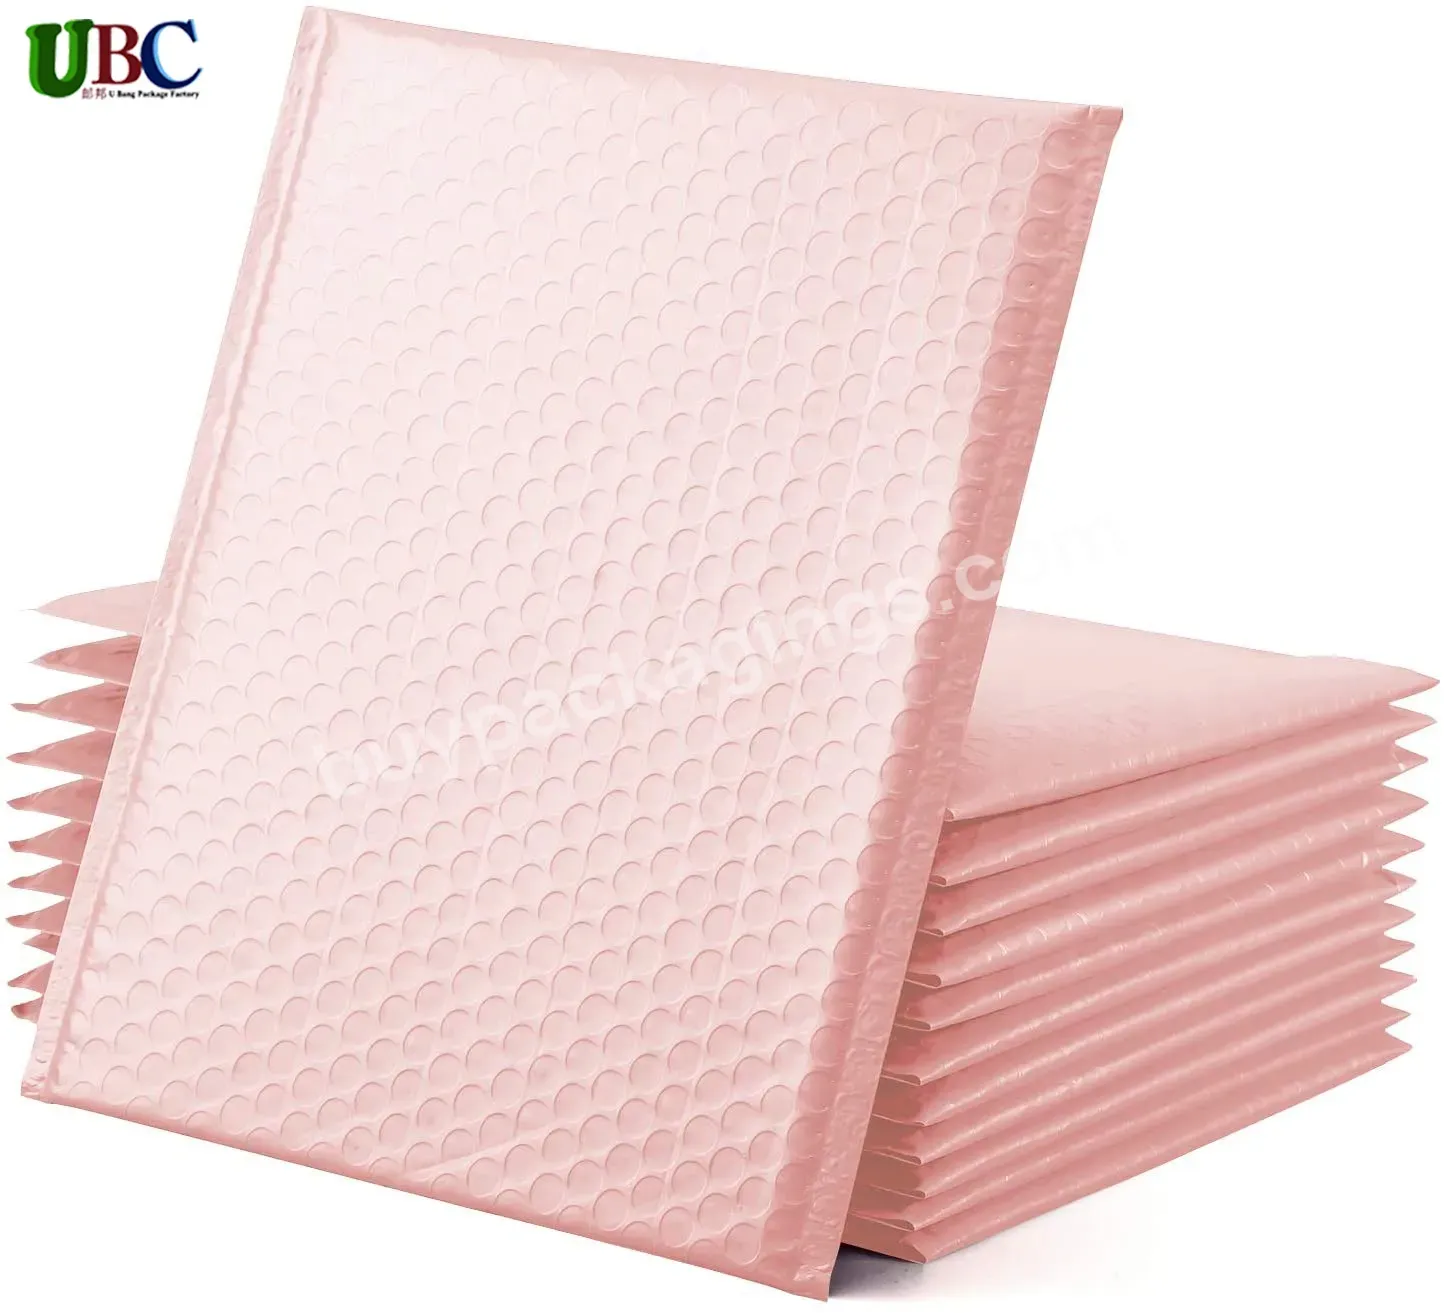 Oem Poly Bubble Mailer Padded Envelope Shipping Bag Packaging Express Bubble Mailer Envelope Light Pink Mailing Bag Bubble - Buy Light Pink Mailing Bag Bubble,Poly Bubble Mailer Padded Envelope,Shipping Bag Packaging Express Bubble Mailer.